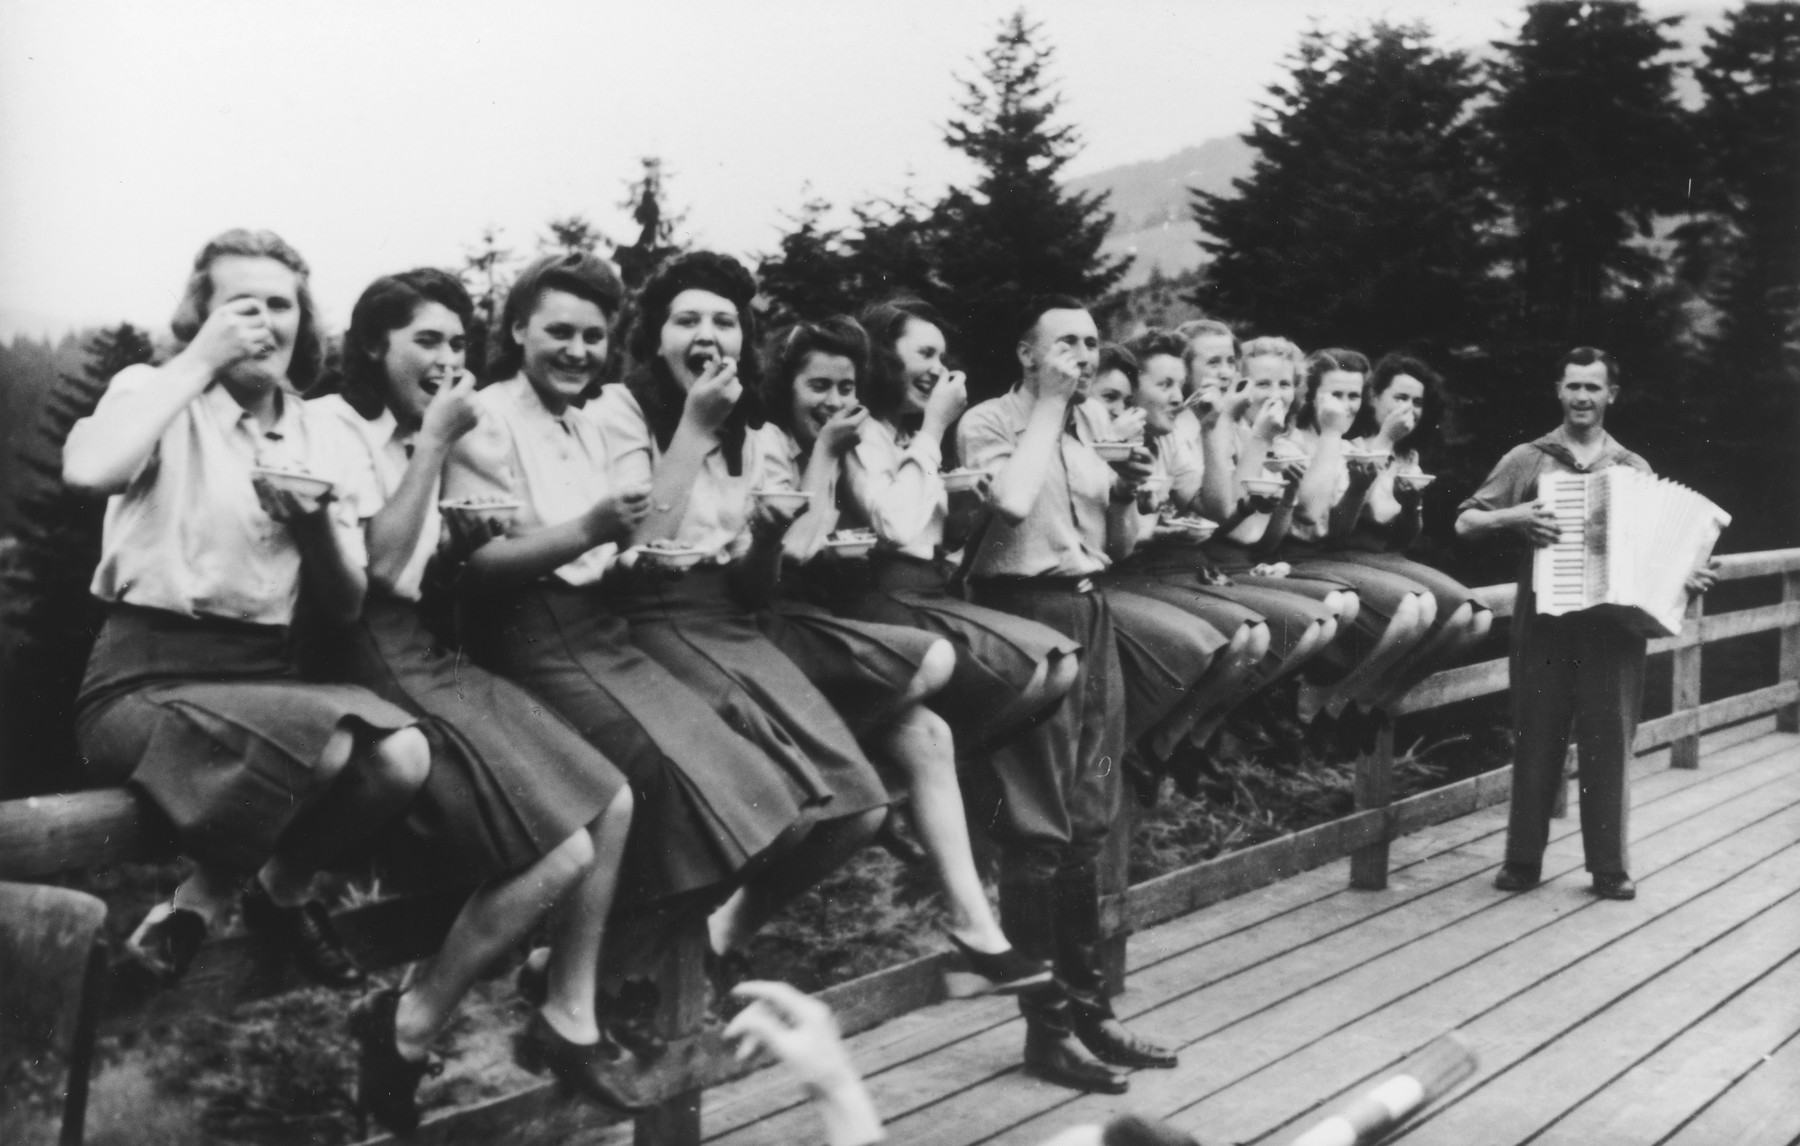 Members of the SS Helferinnen (female auxiliaries) and SS officer Karl Hoecker sit on a fence railing in Solahuette eating bowls of blueberries.  In the background is a man playing the accordion. 

The original caption reads "Hier gibt es Blaubeeren" (there are blueberries here).